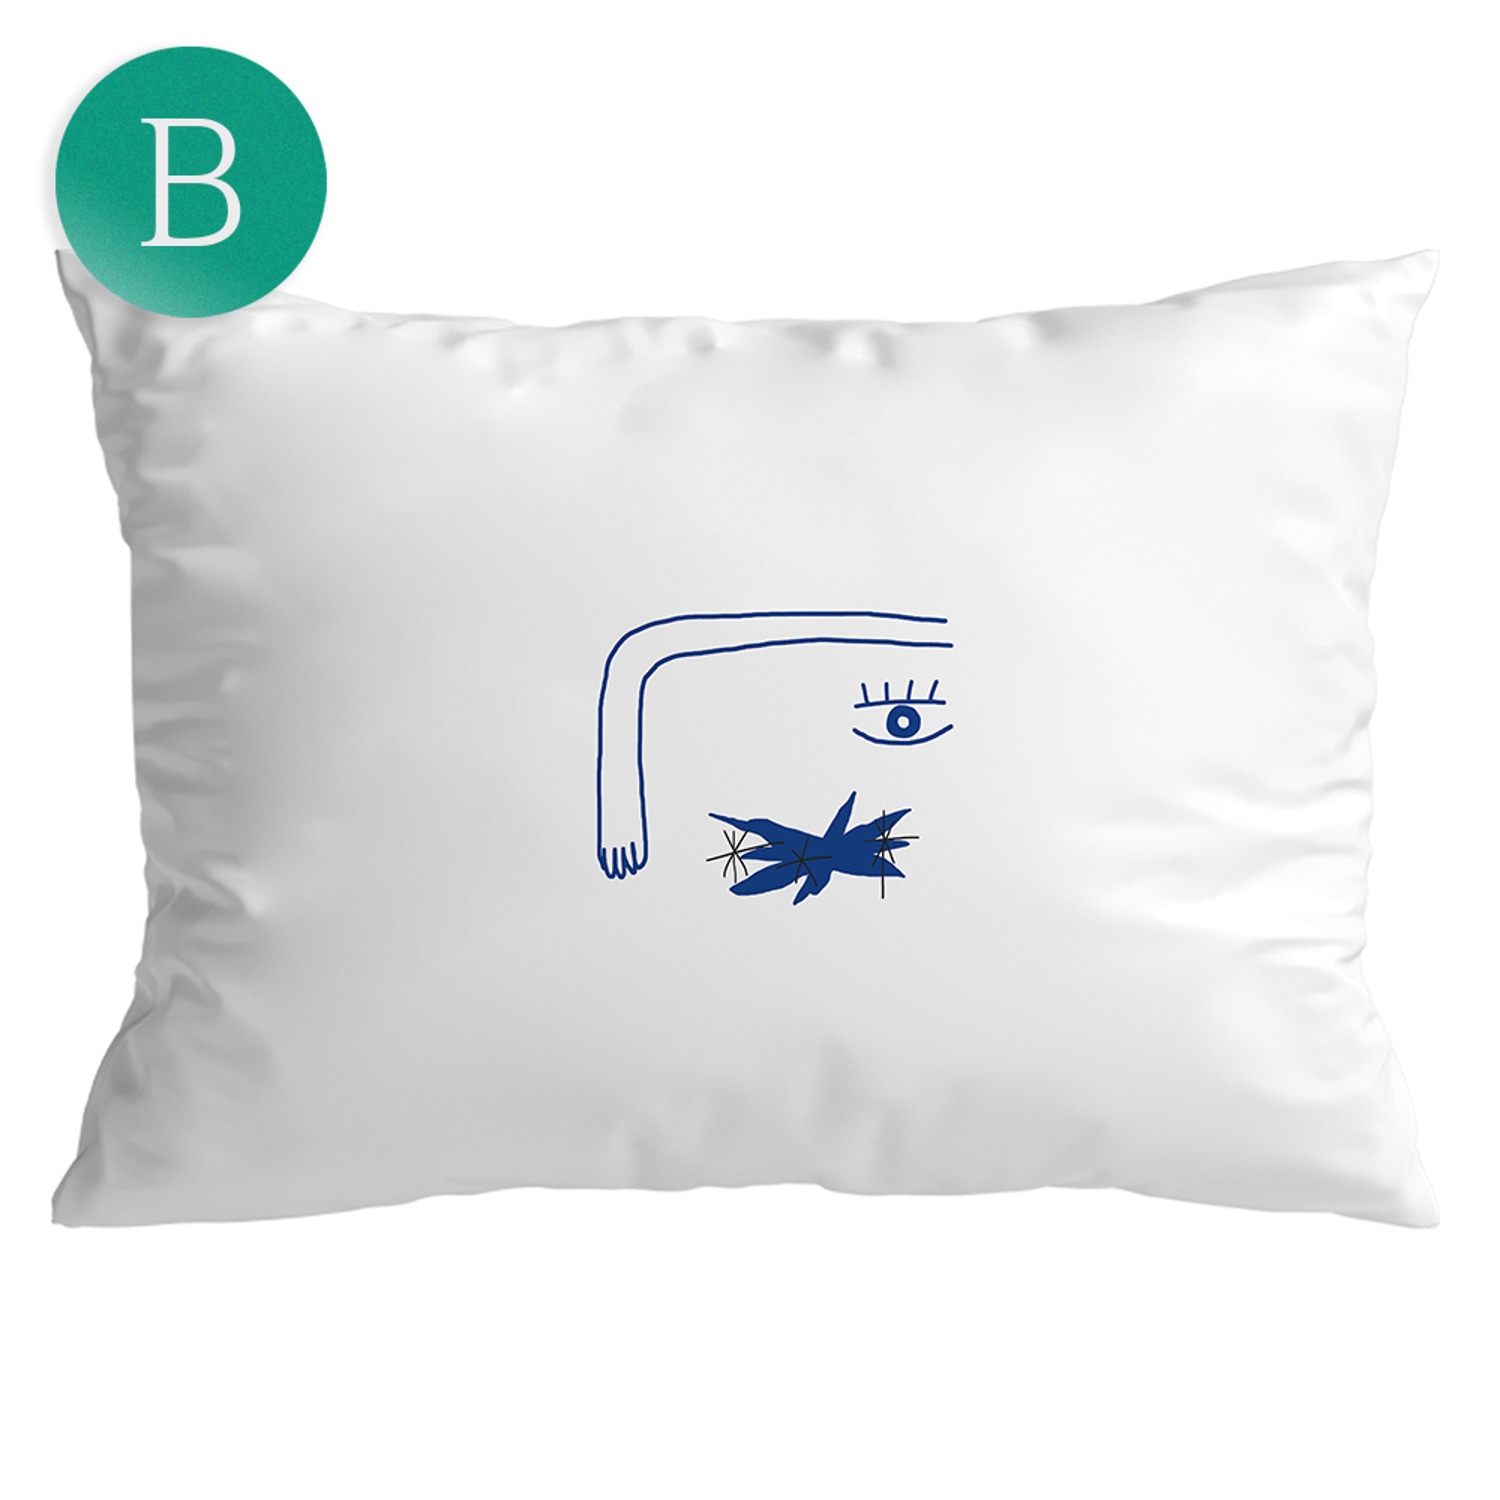 [B품세일] Look inside  Pillow cover